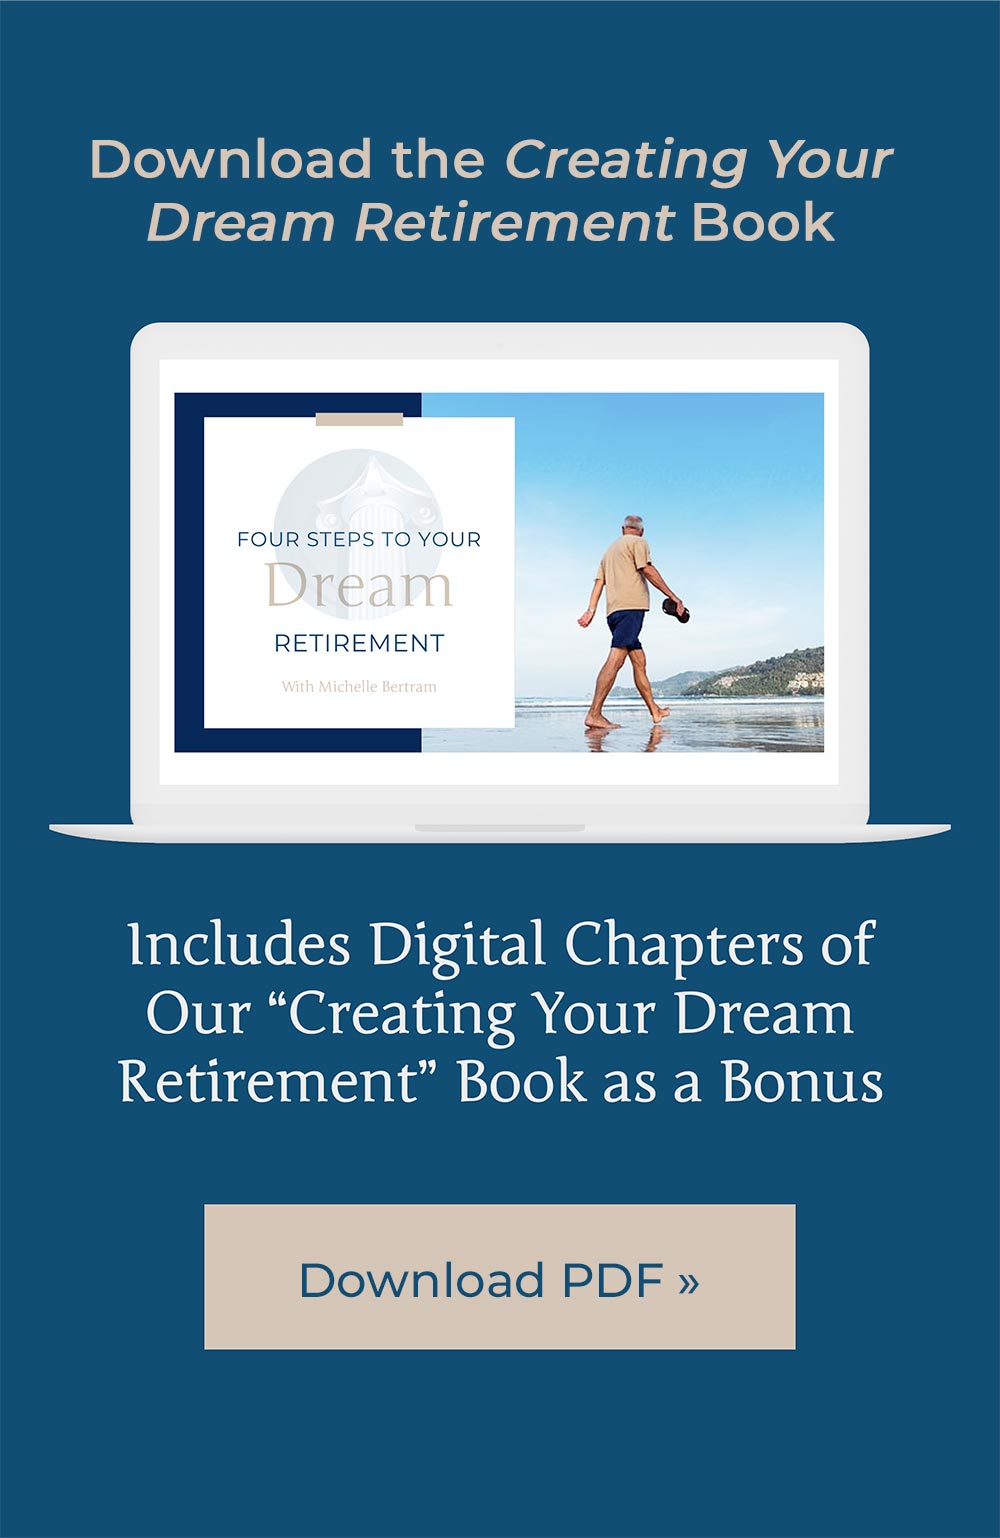 Download the PDF for Creating Your Dream Retirement book